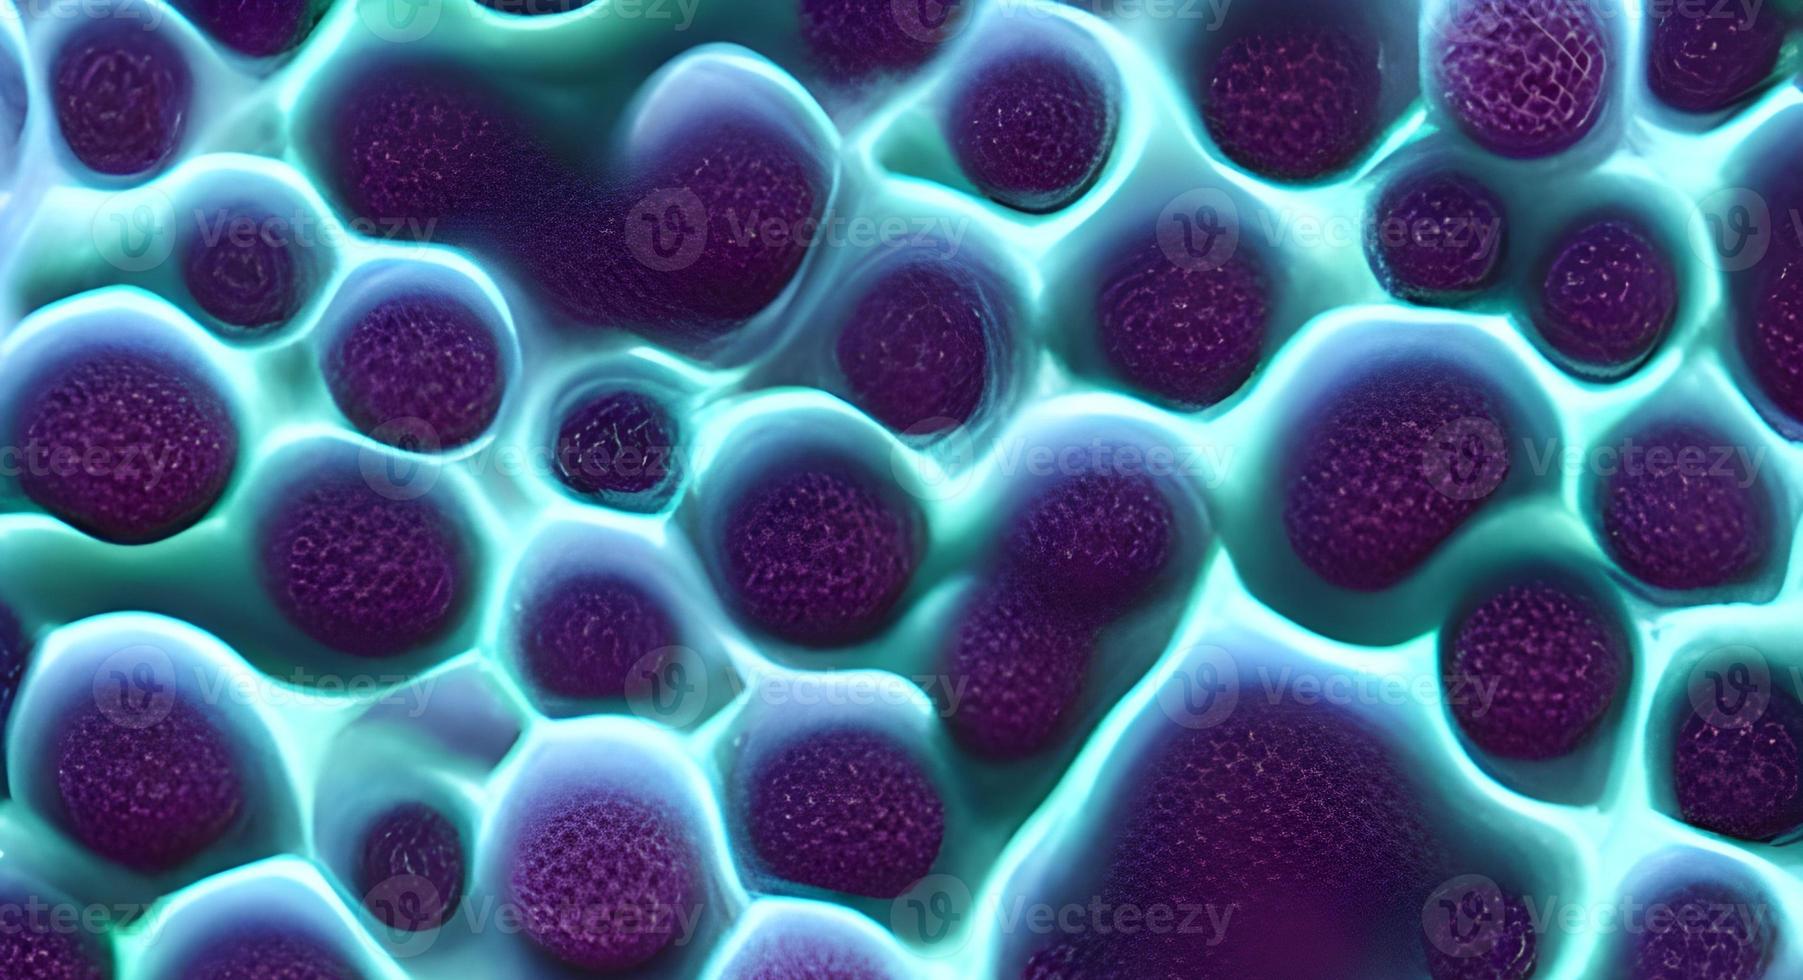 Close-up of virus cells or bacteria on light background photo